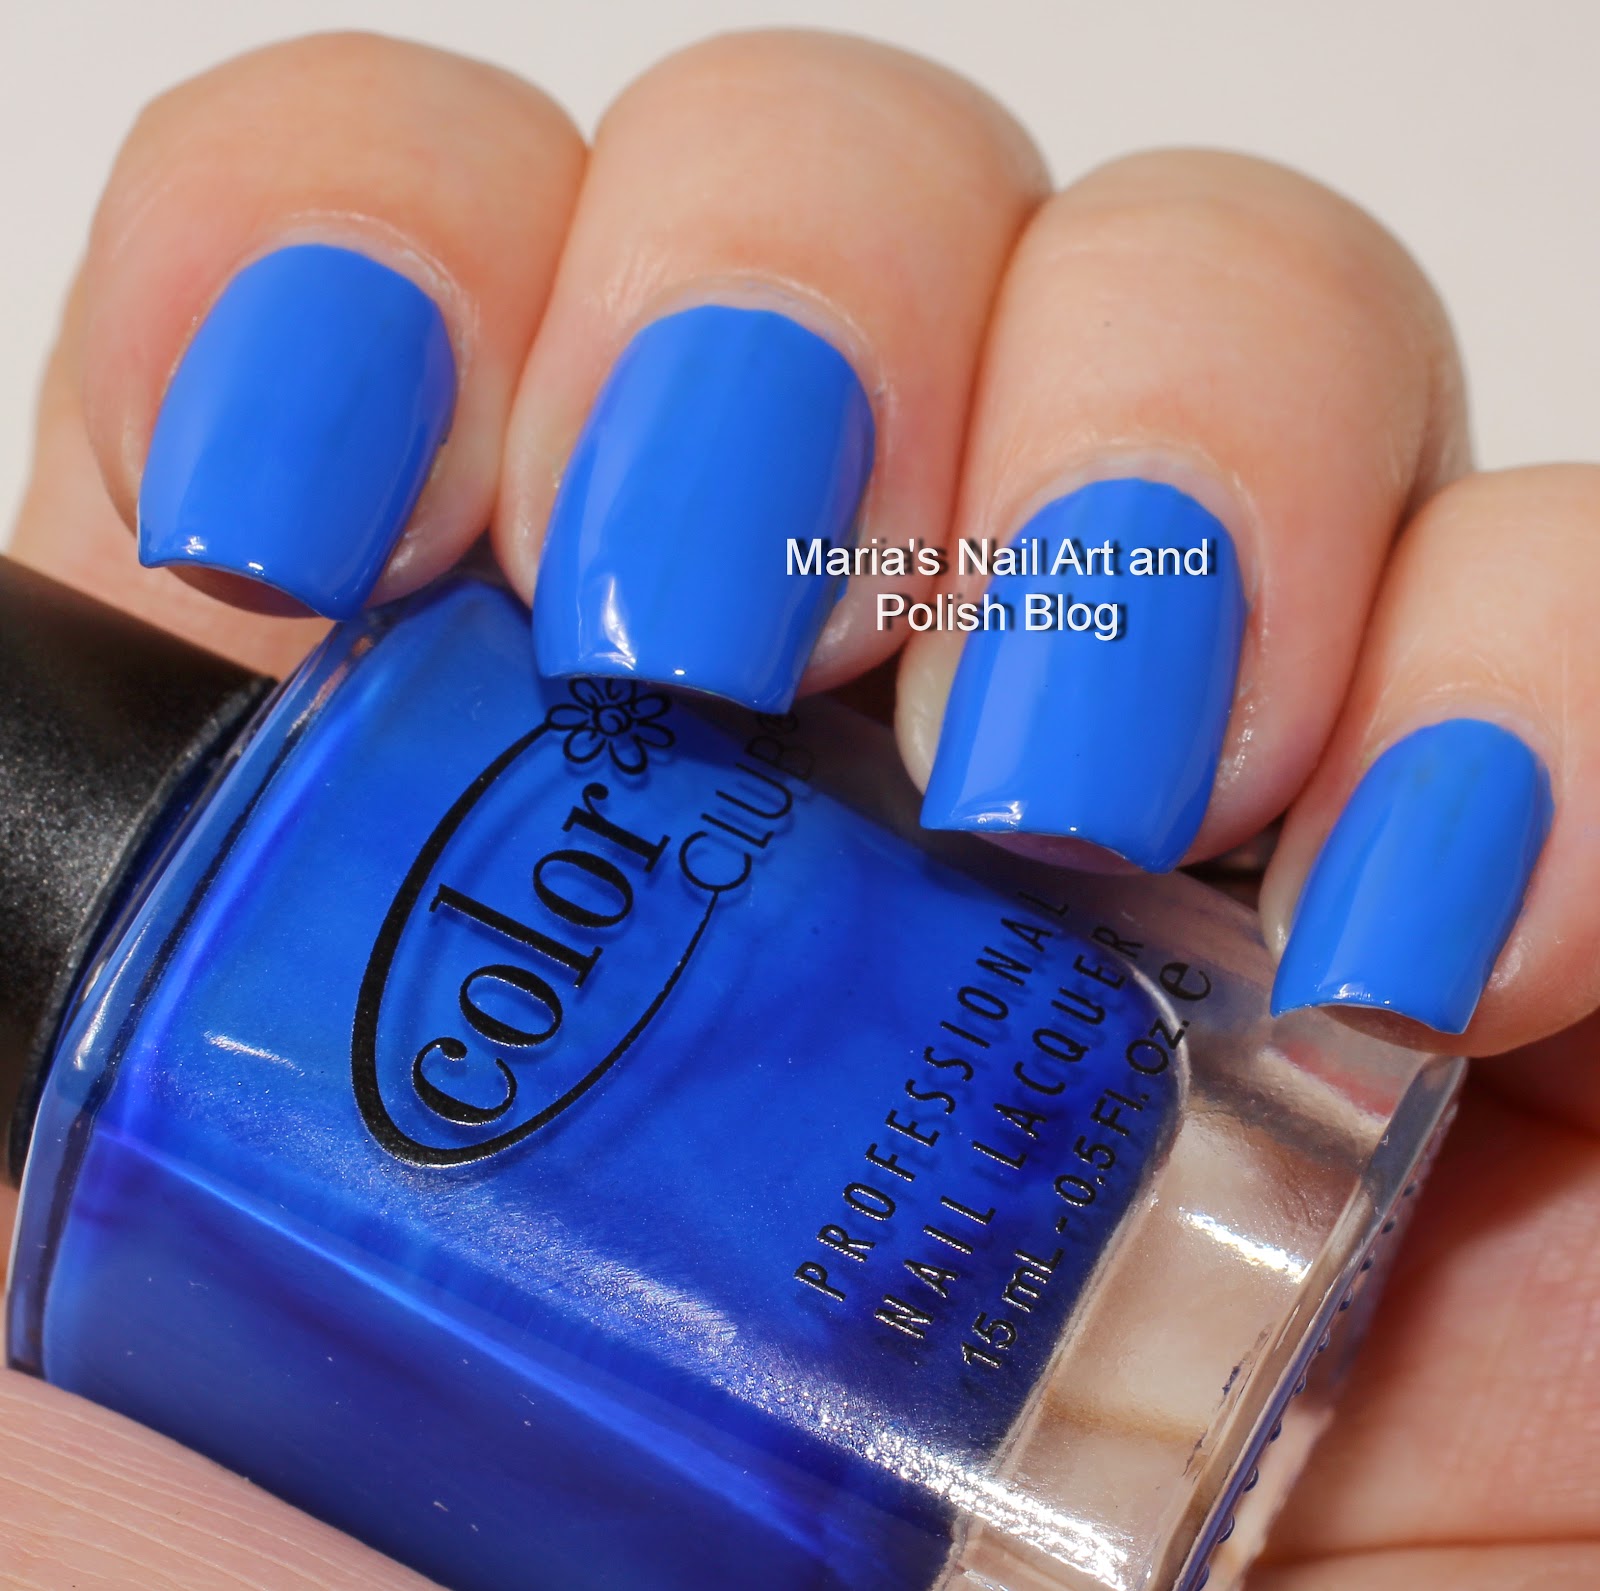 Marias Nail Art and Polish Blog: Color Club swatch spam: Blue Ming ...